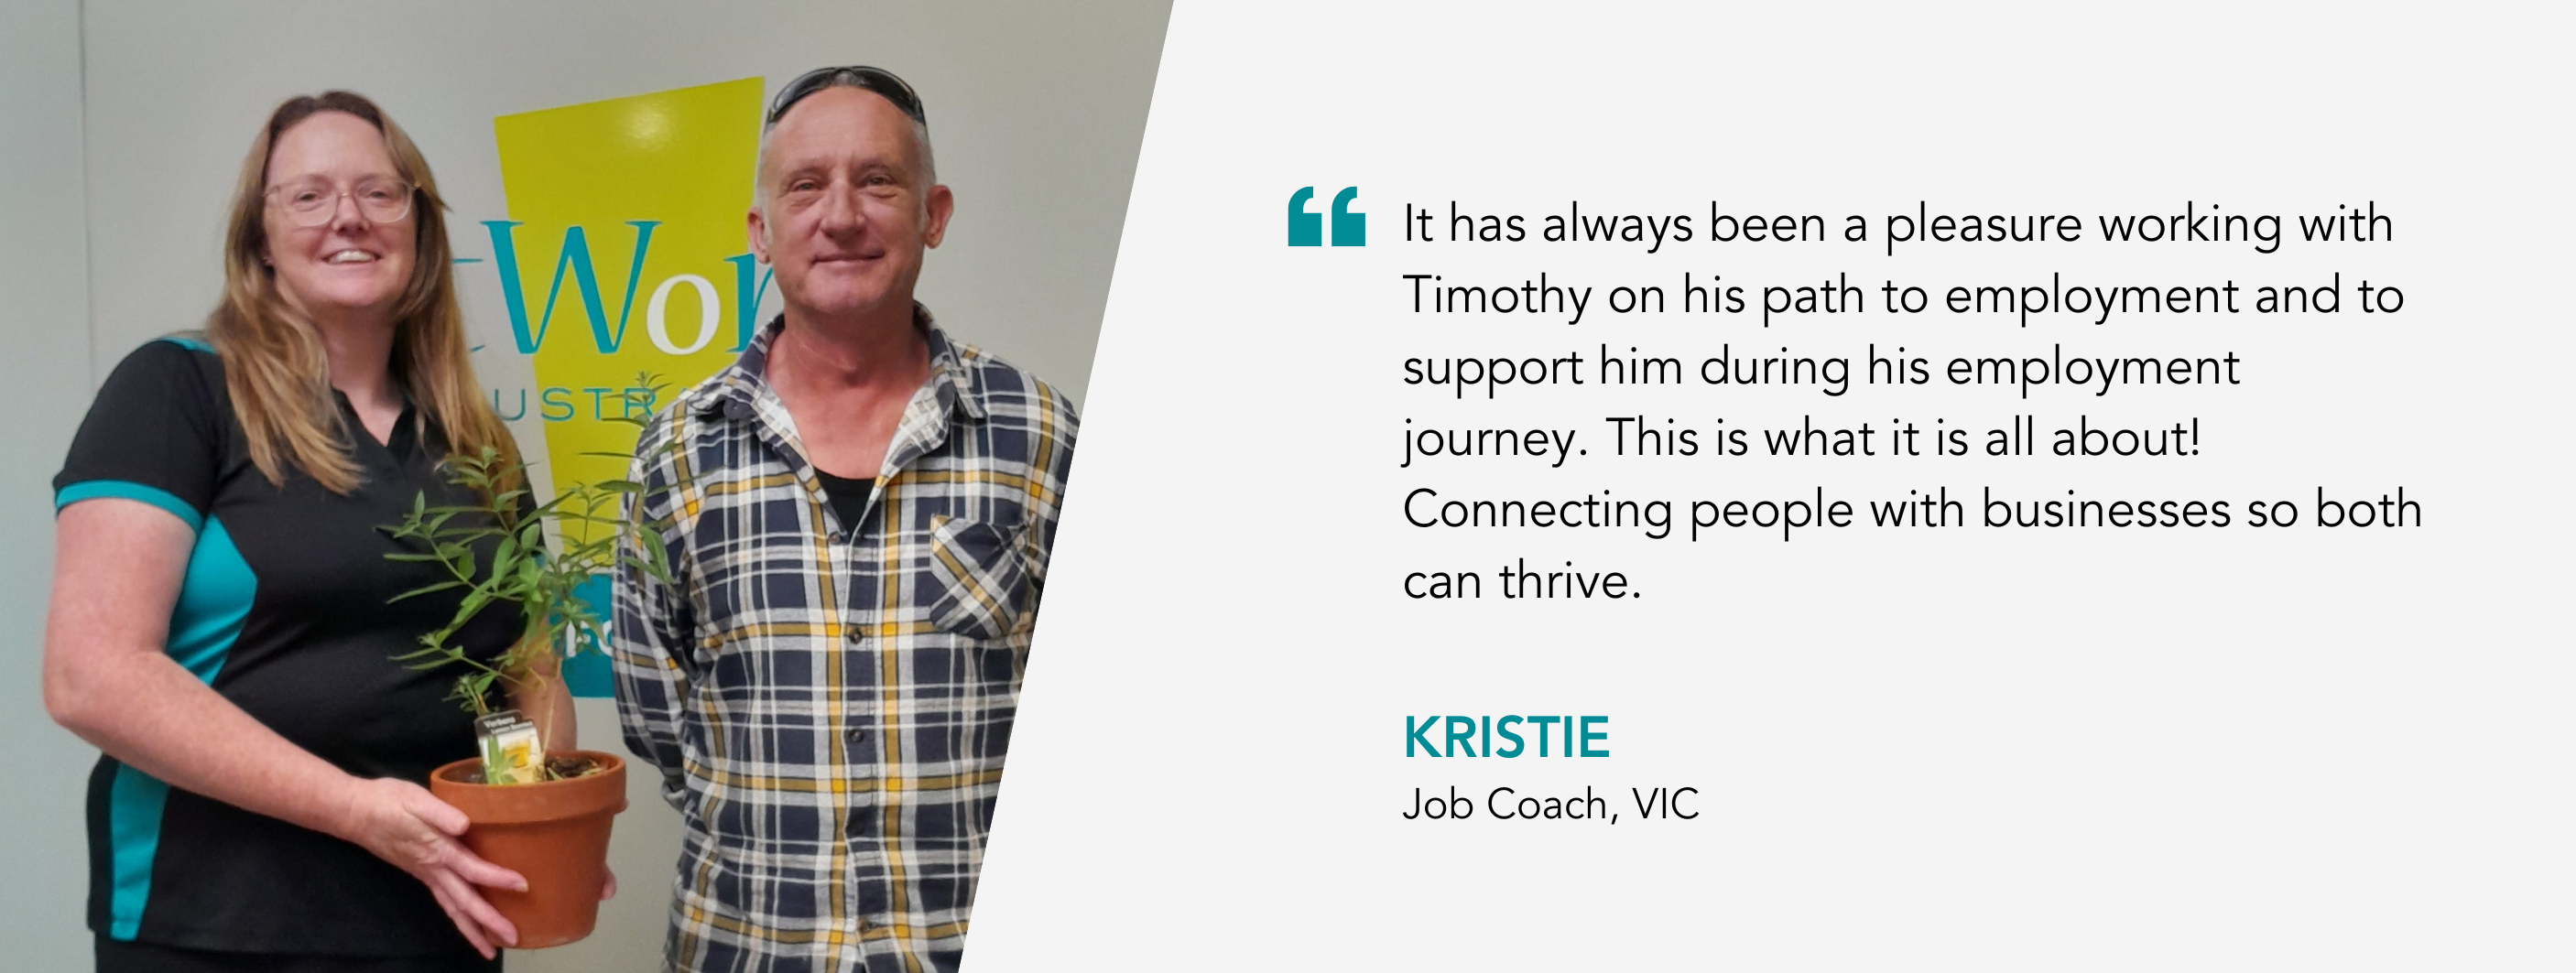 It has always been a pleasure working with Tim on his path to employment and to support him during his employment journey. This is what it is all about! Connecting people with businesses so both can thrive. Kristie, Job Coach, VIC